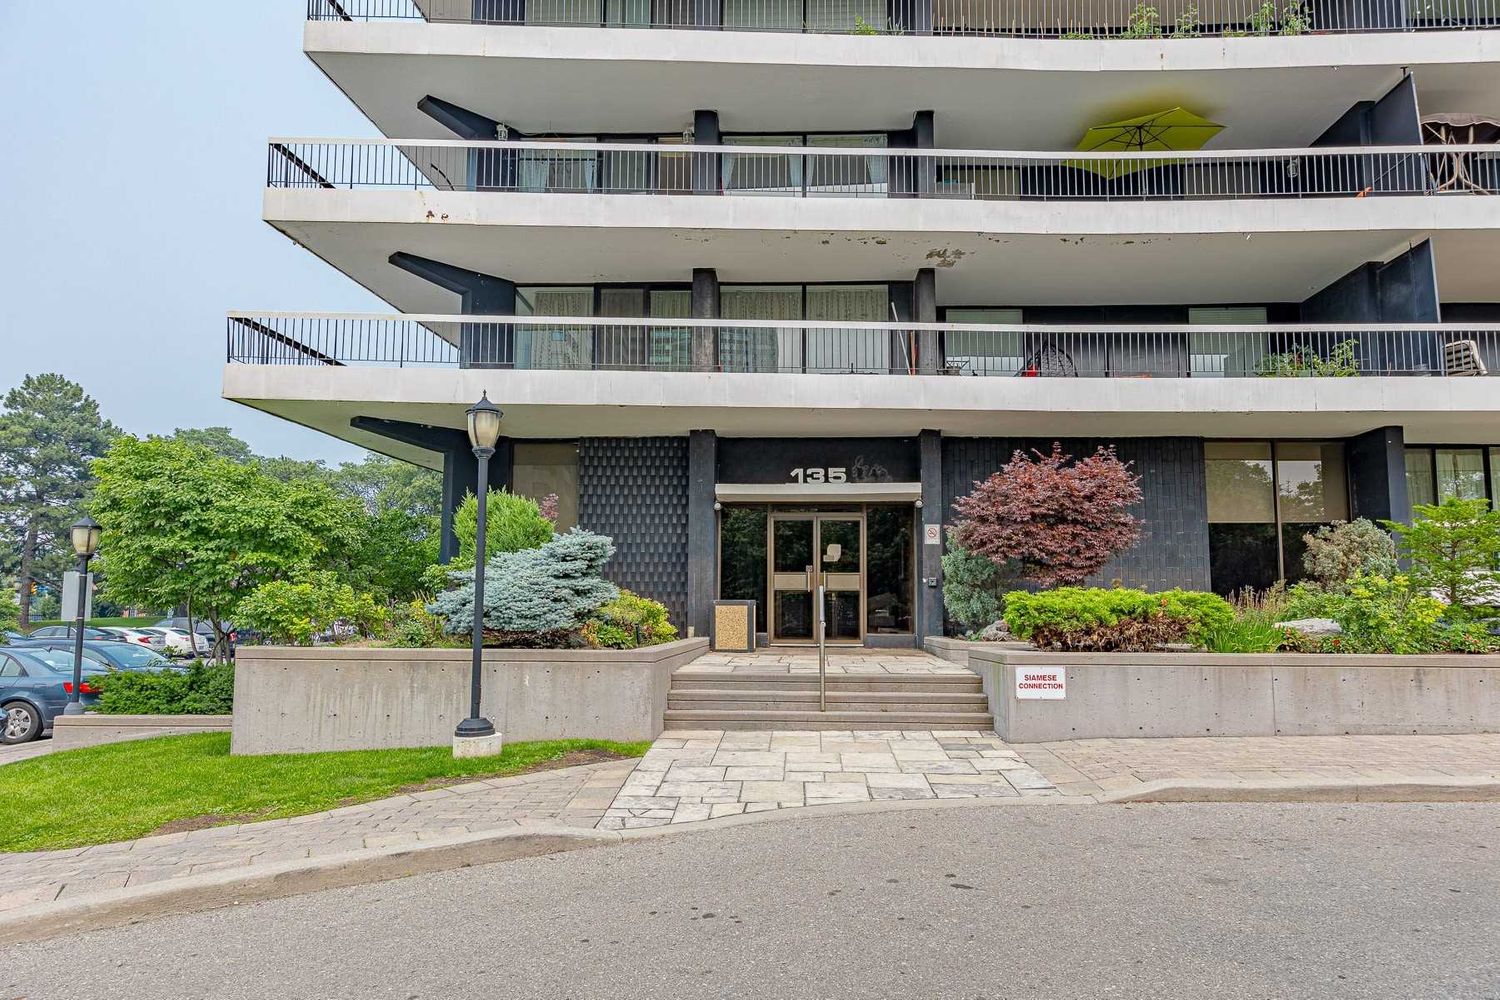 135 Antibes Drive. 135 Antibes Condos is located in  North York, Toronto - image #2 of 2